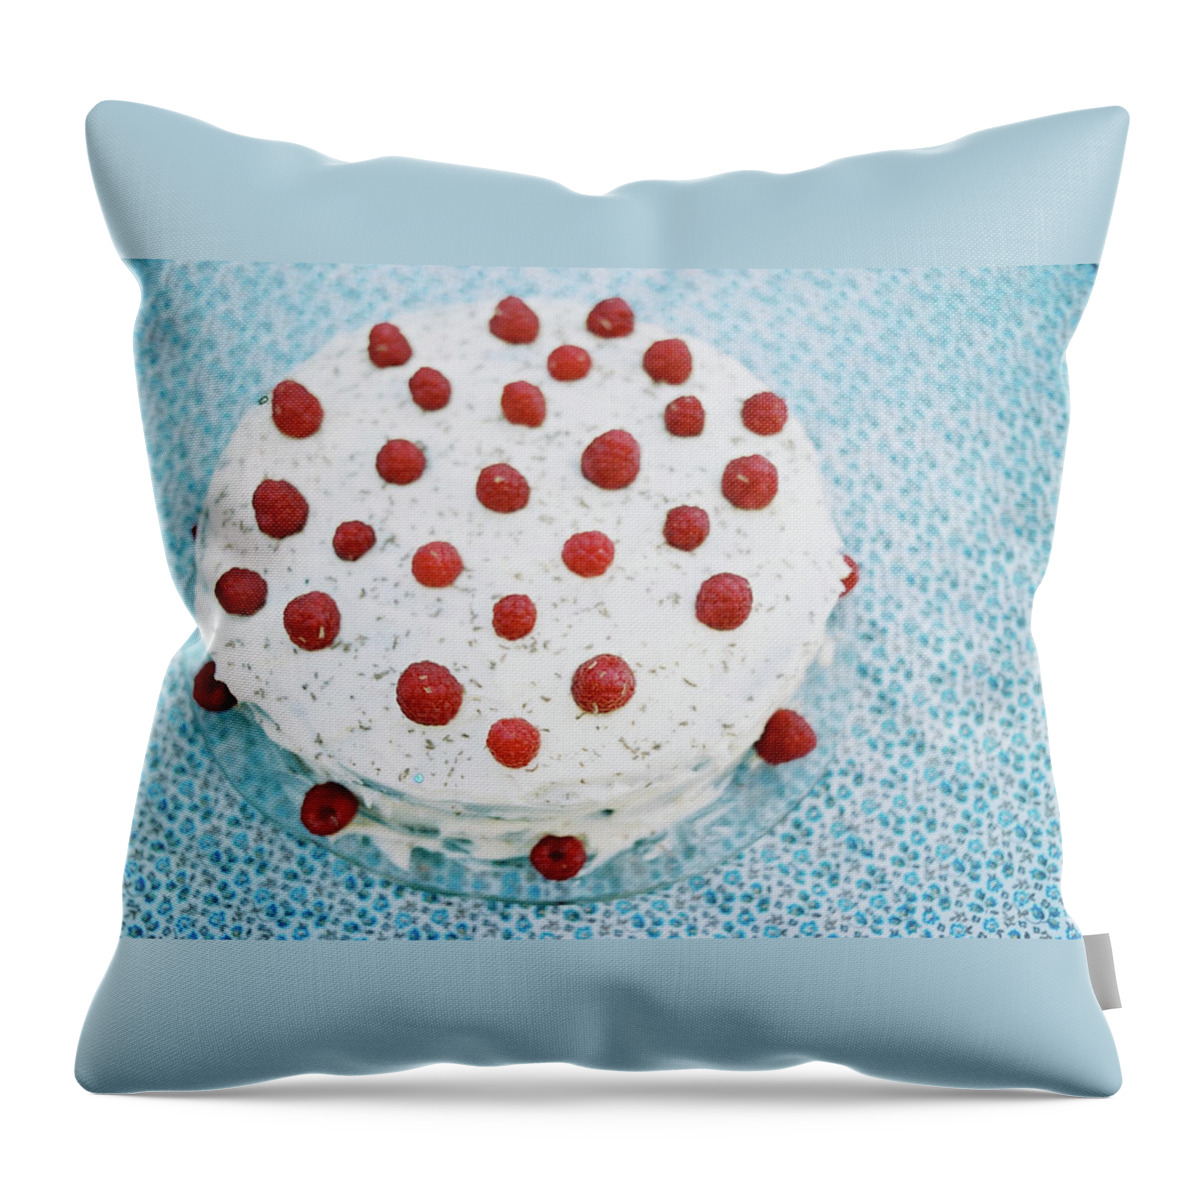 Temptation Throw Pillow featuring the photograph Baked Cake by Raquel Fialho